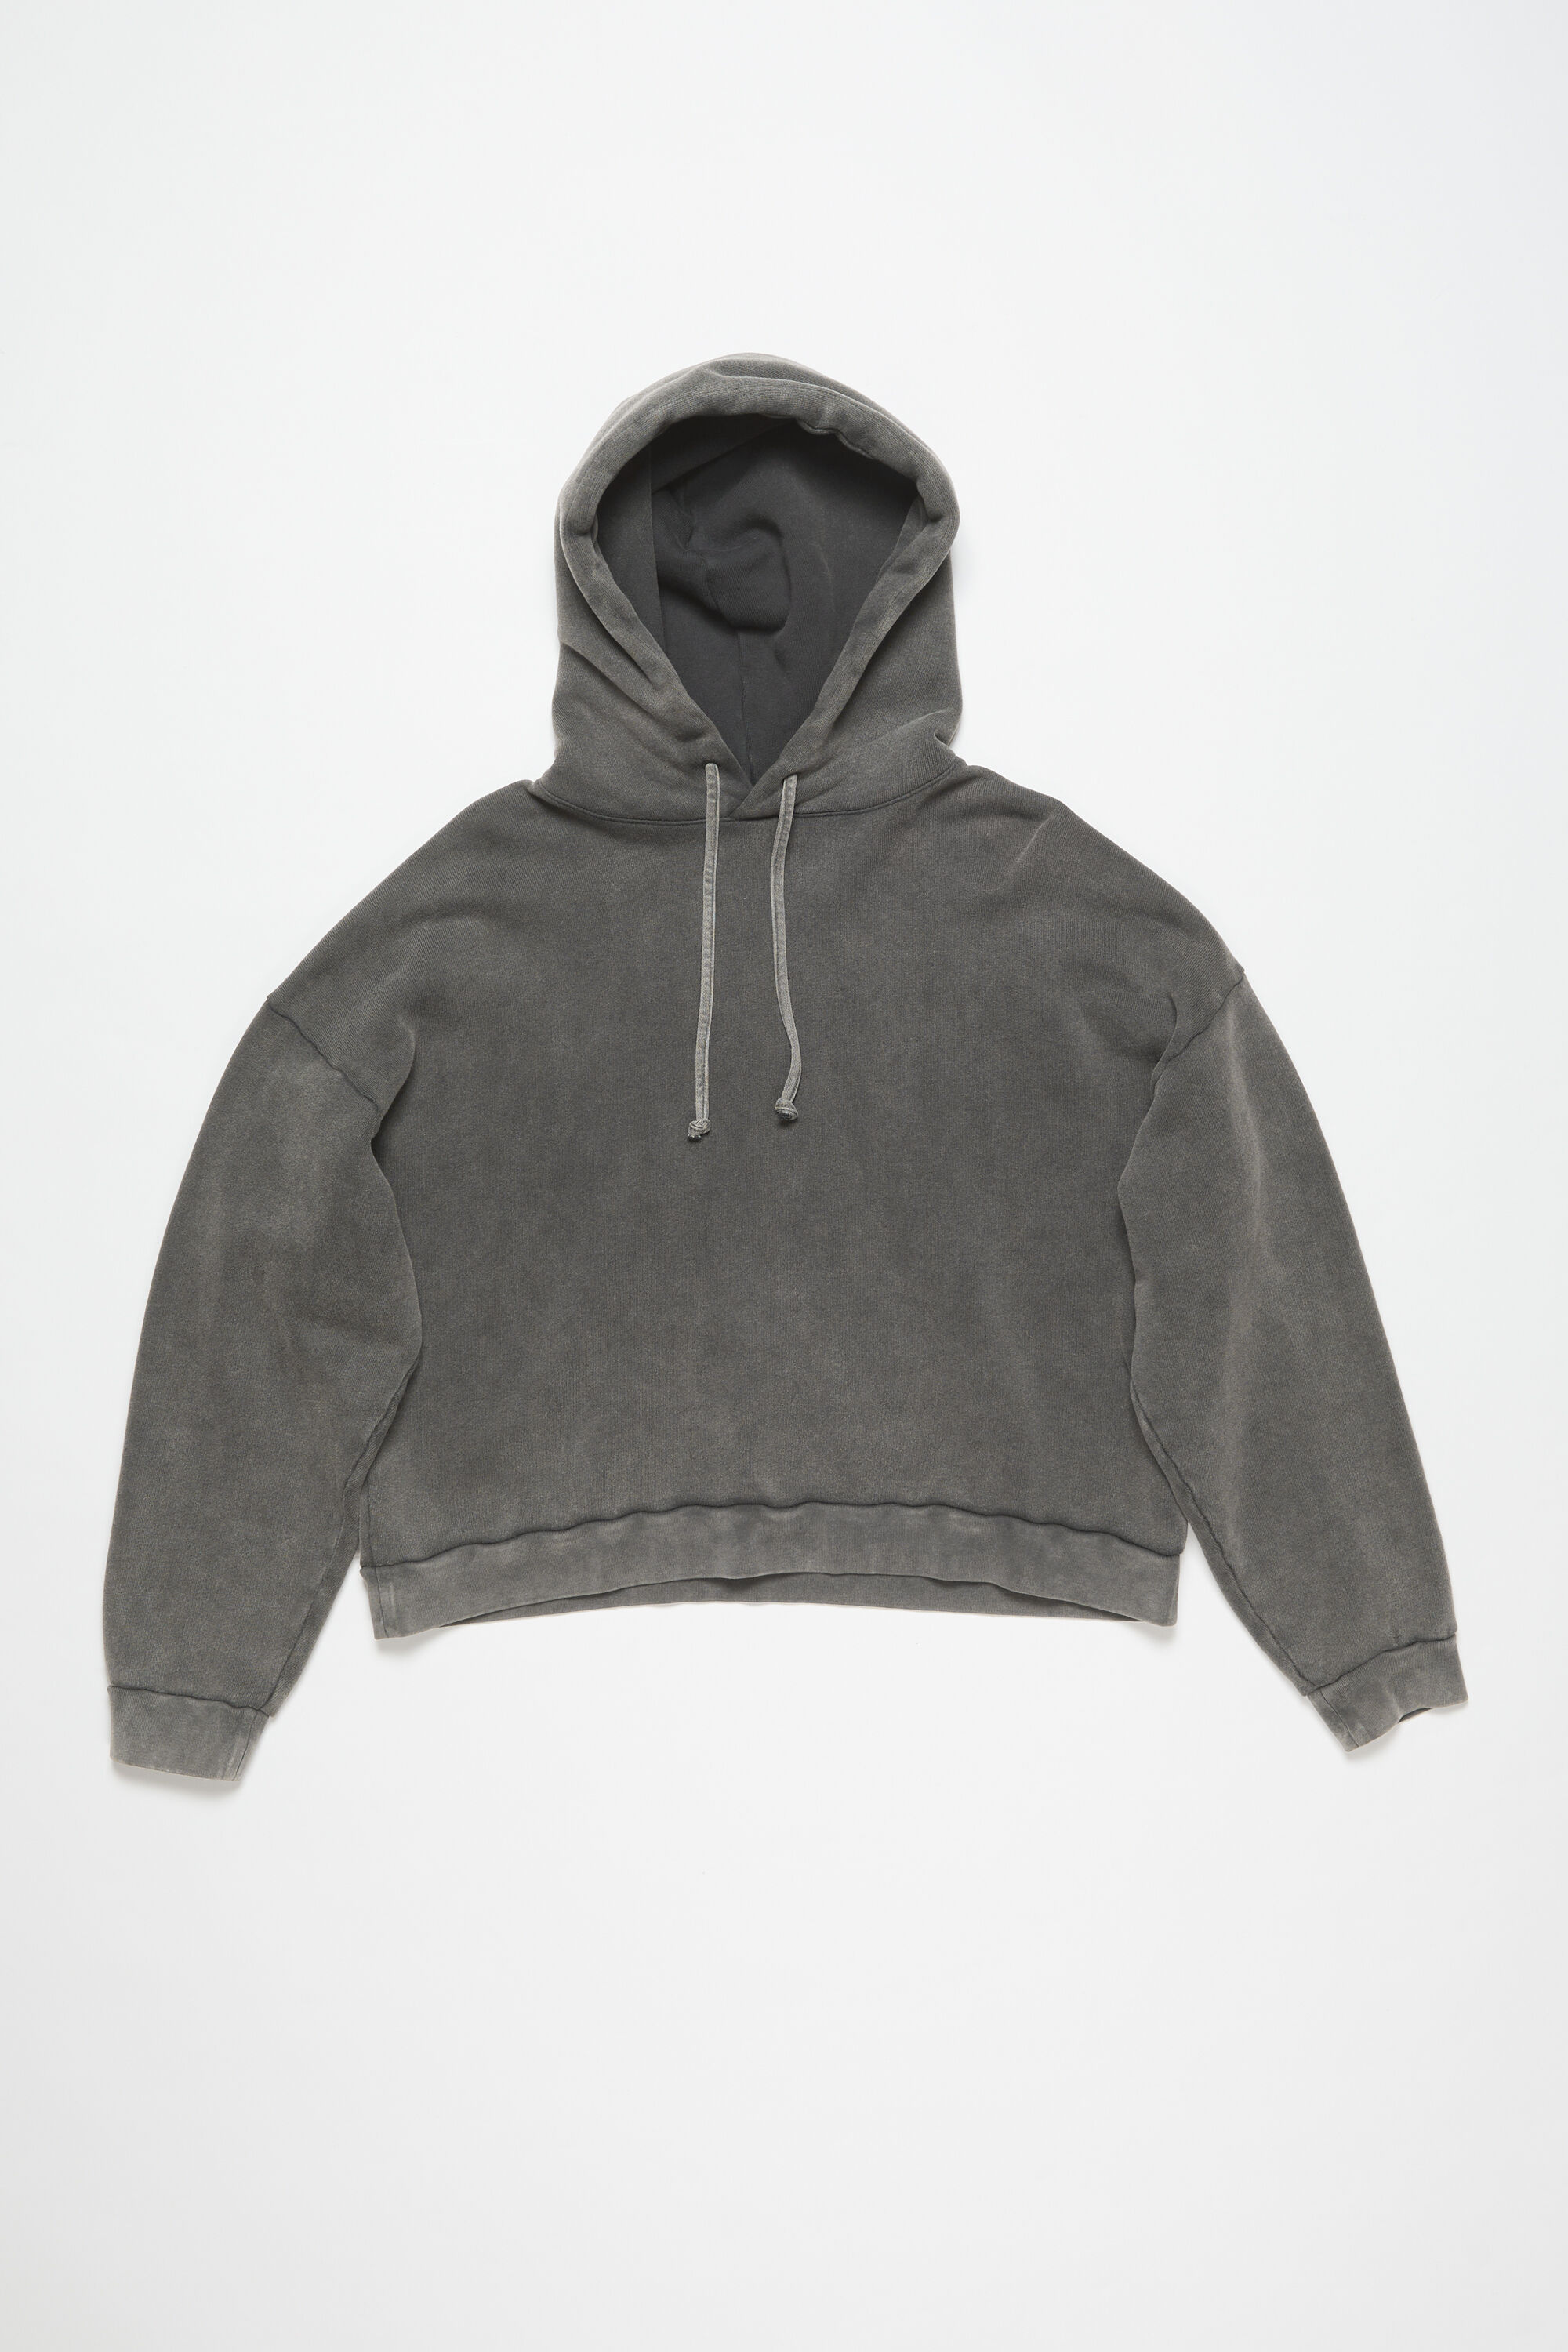 Acne Studios - Hooded sweater logo patch - Faded black